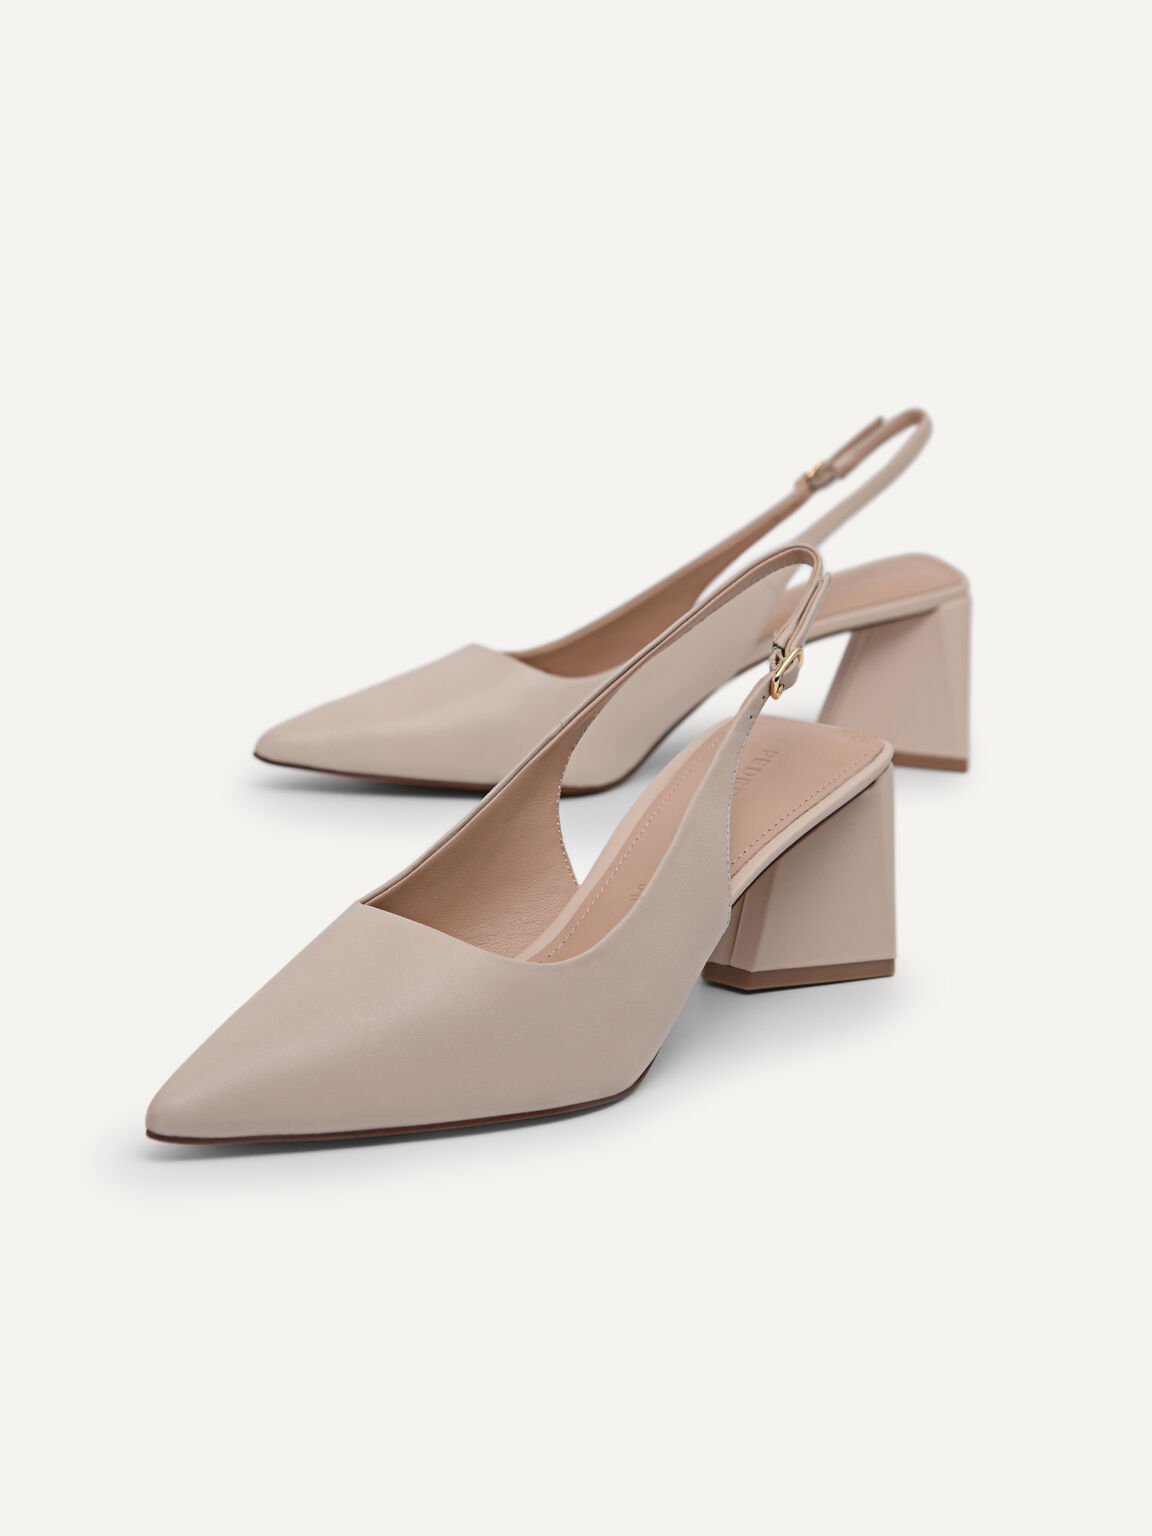 Leather Pointed Slingback Pumps, Nude, hi-res